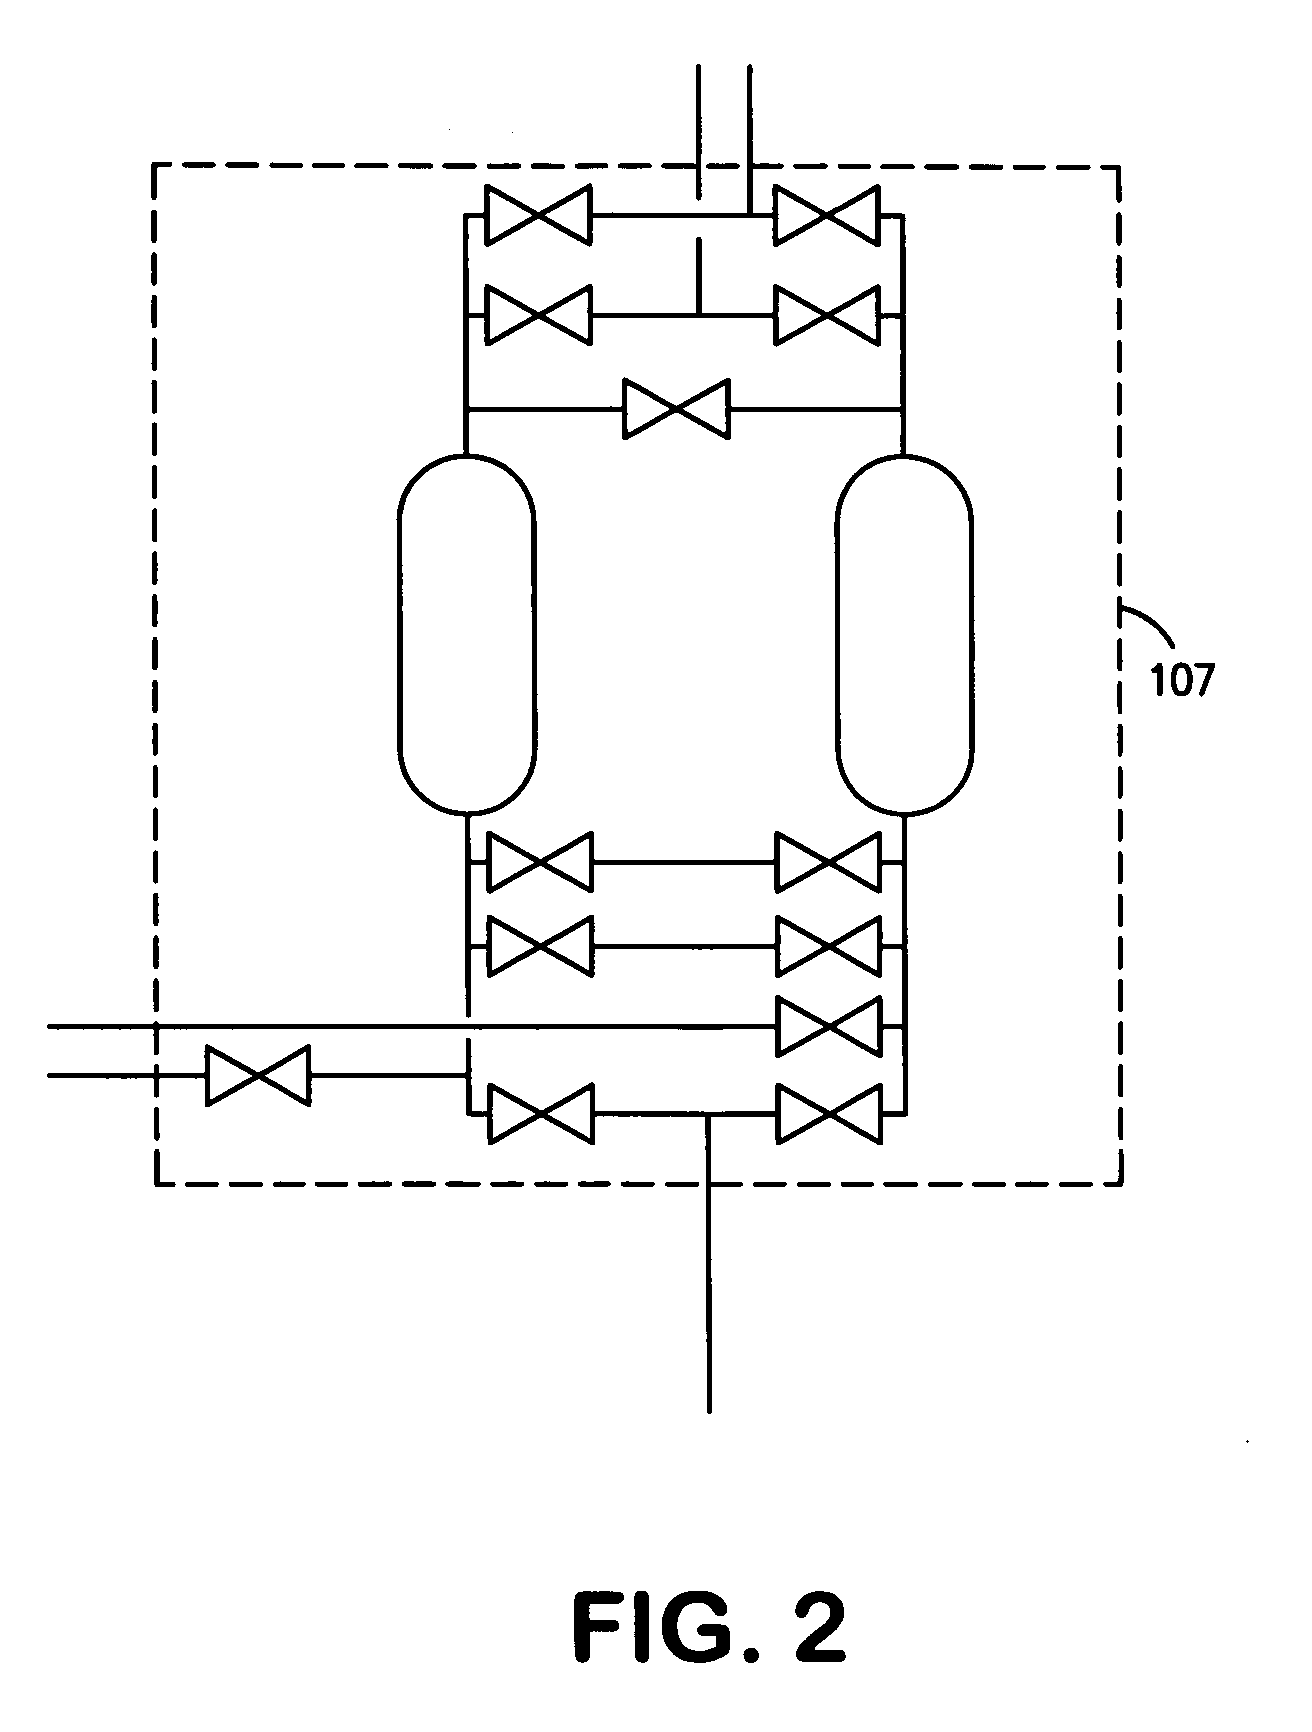 Method for designing a cryogenic air separation plant